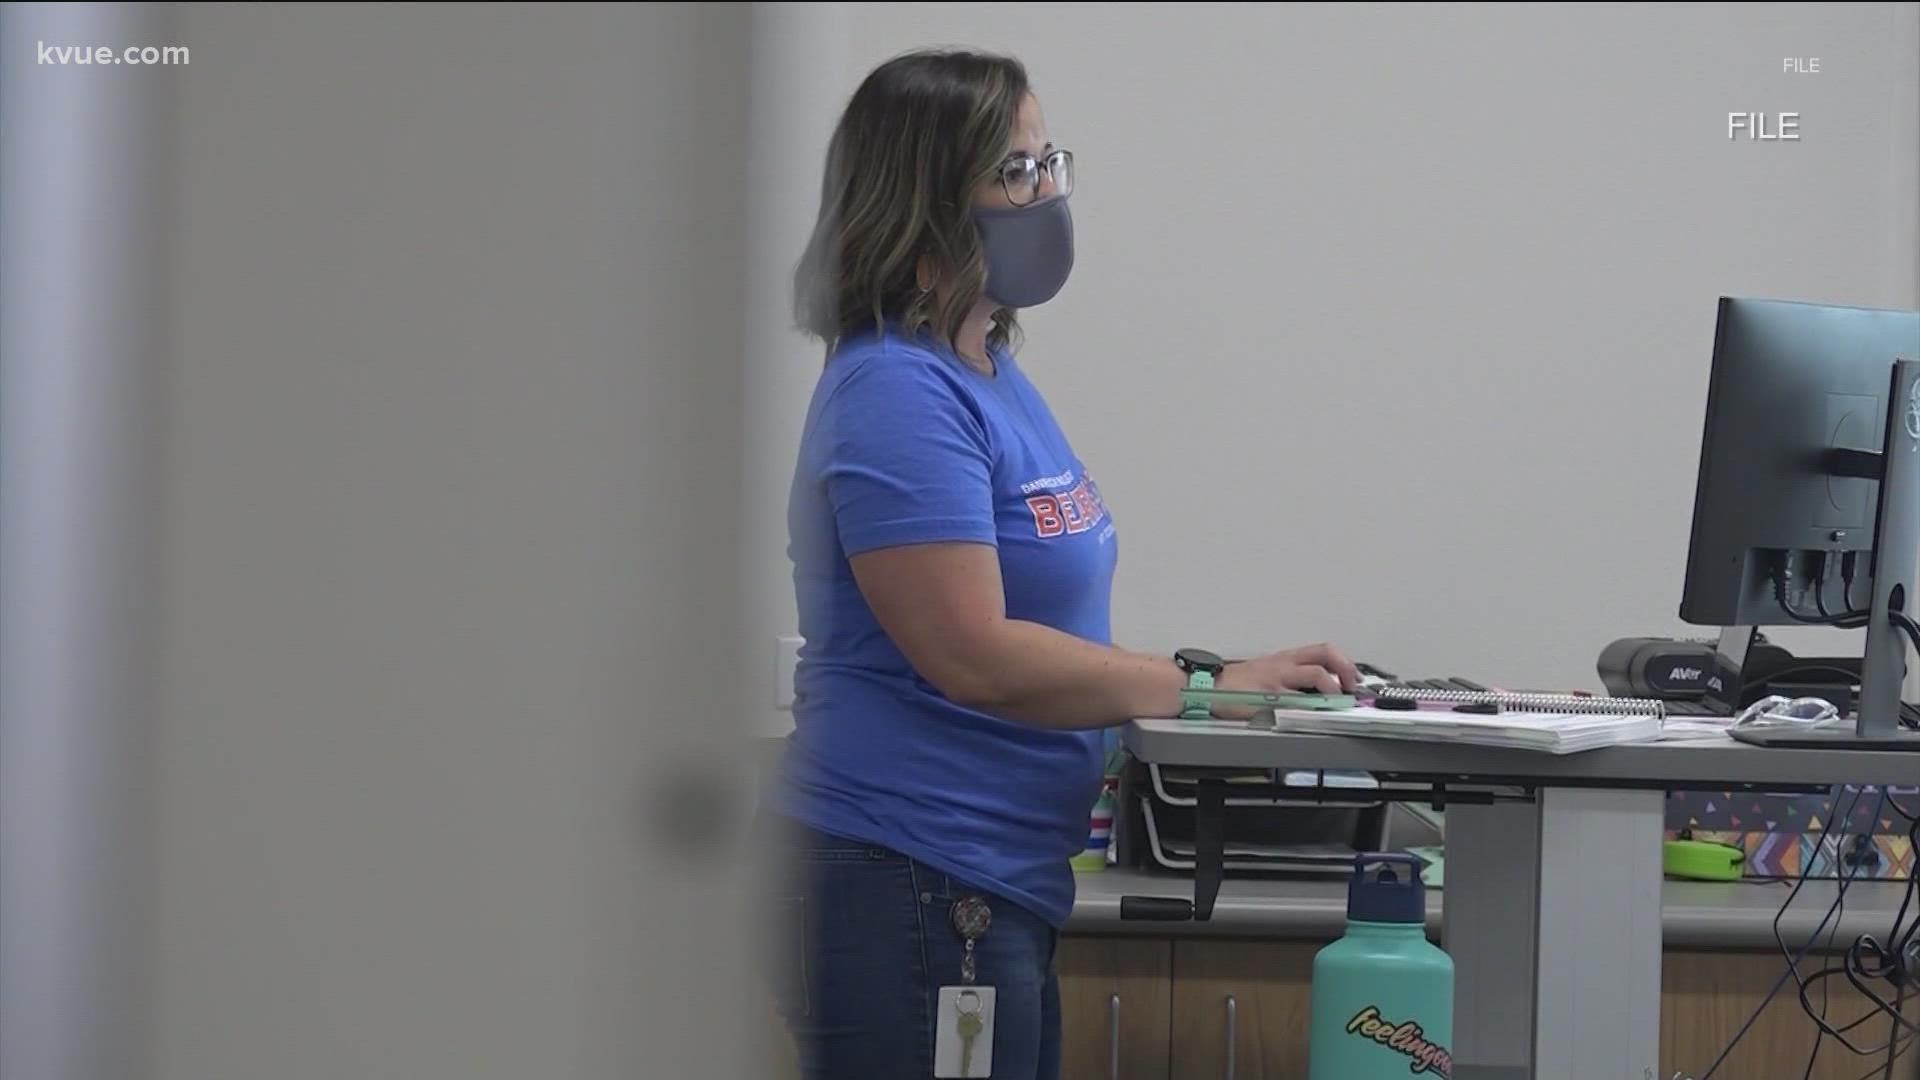 Austin ISD students are returning to classrooms amid rising COVID-19 cases and hospitalizations.